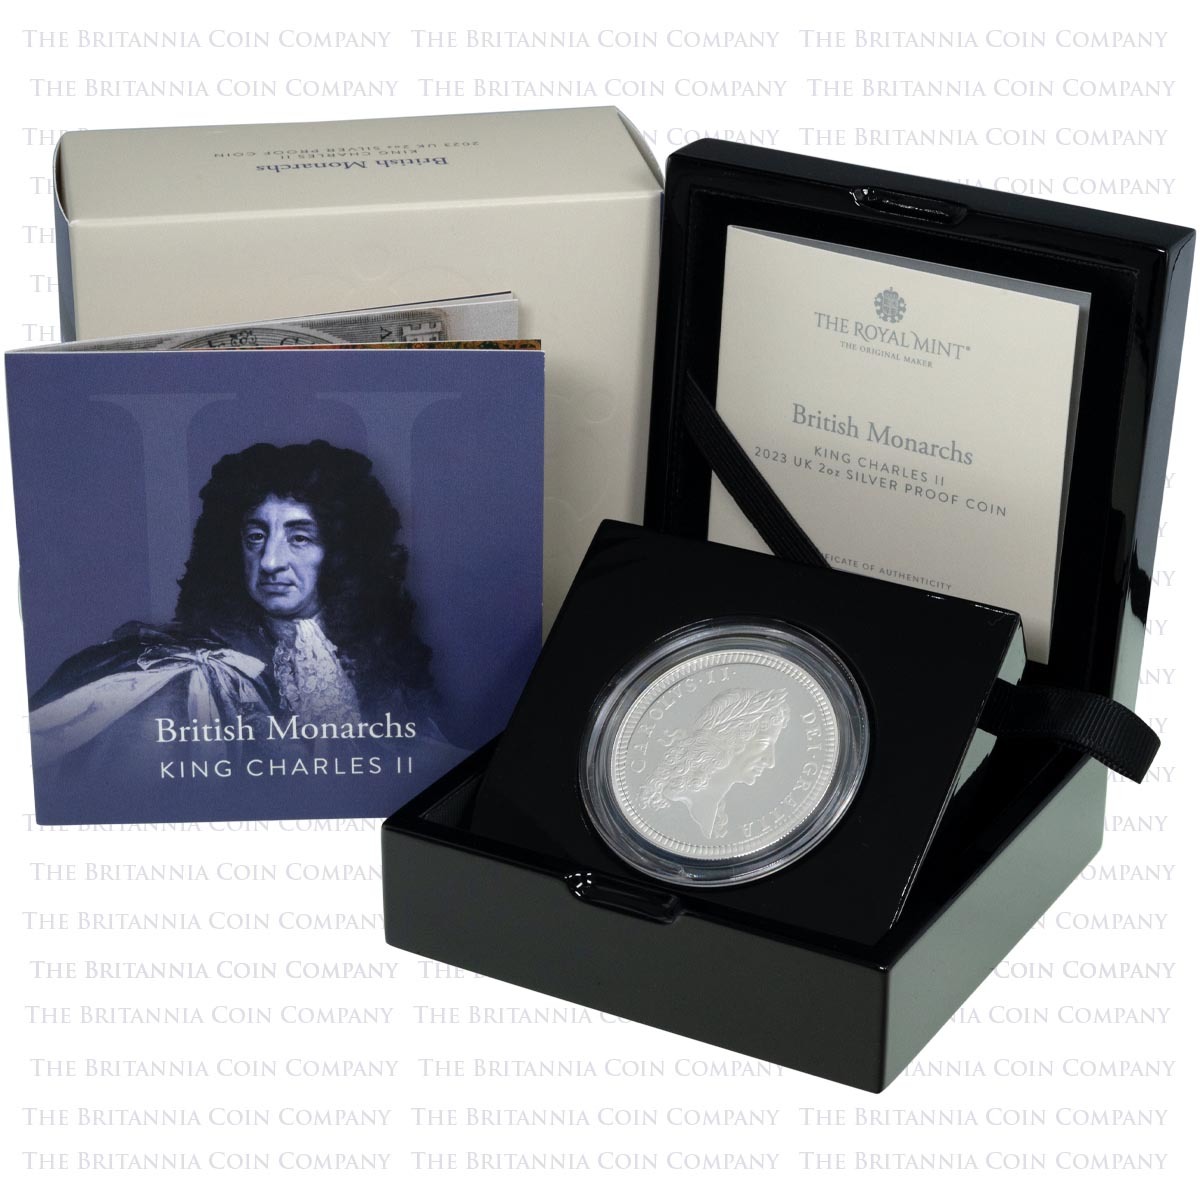 UK23C2S2 2023 King Charles II British Monarchs Two Ounce Silver Proof Coin Boxed